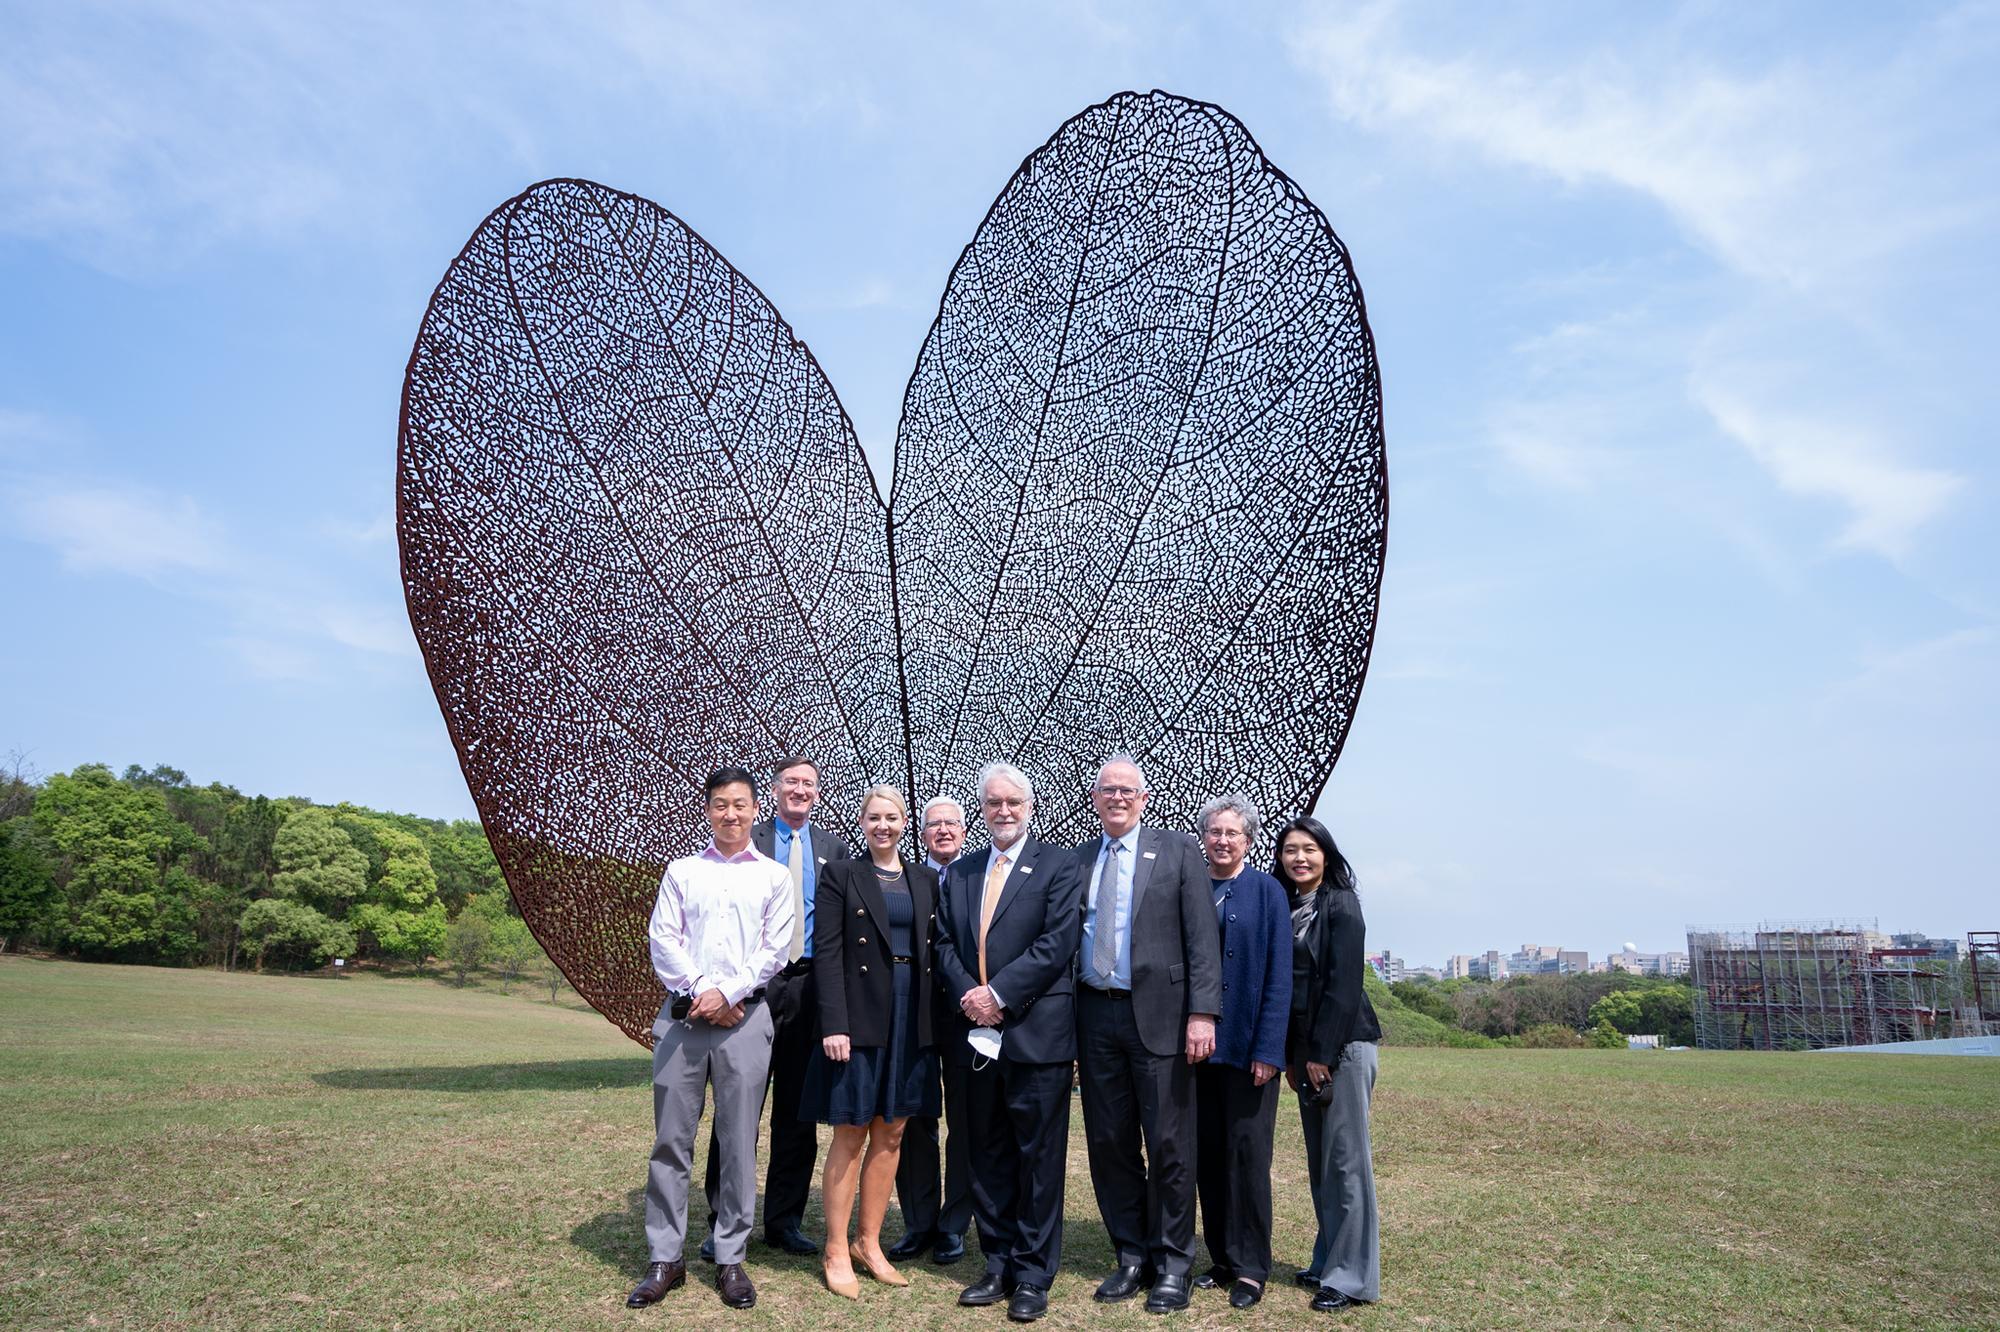 University of Illinois System delegation took photos in front of the well-known public art 